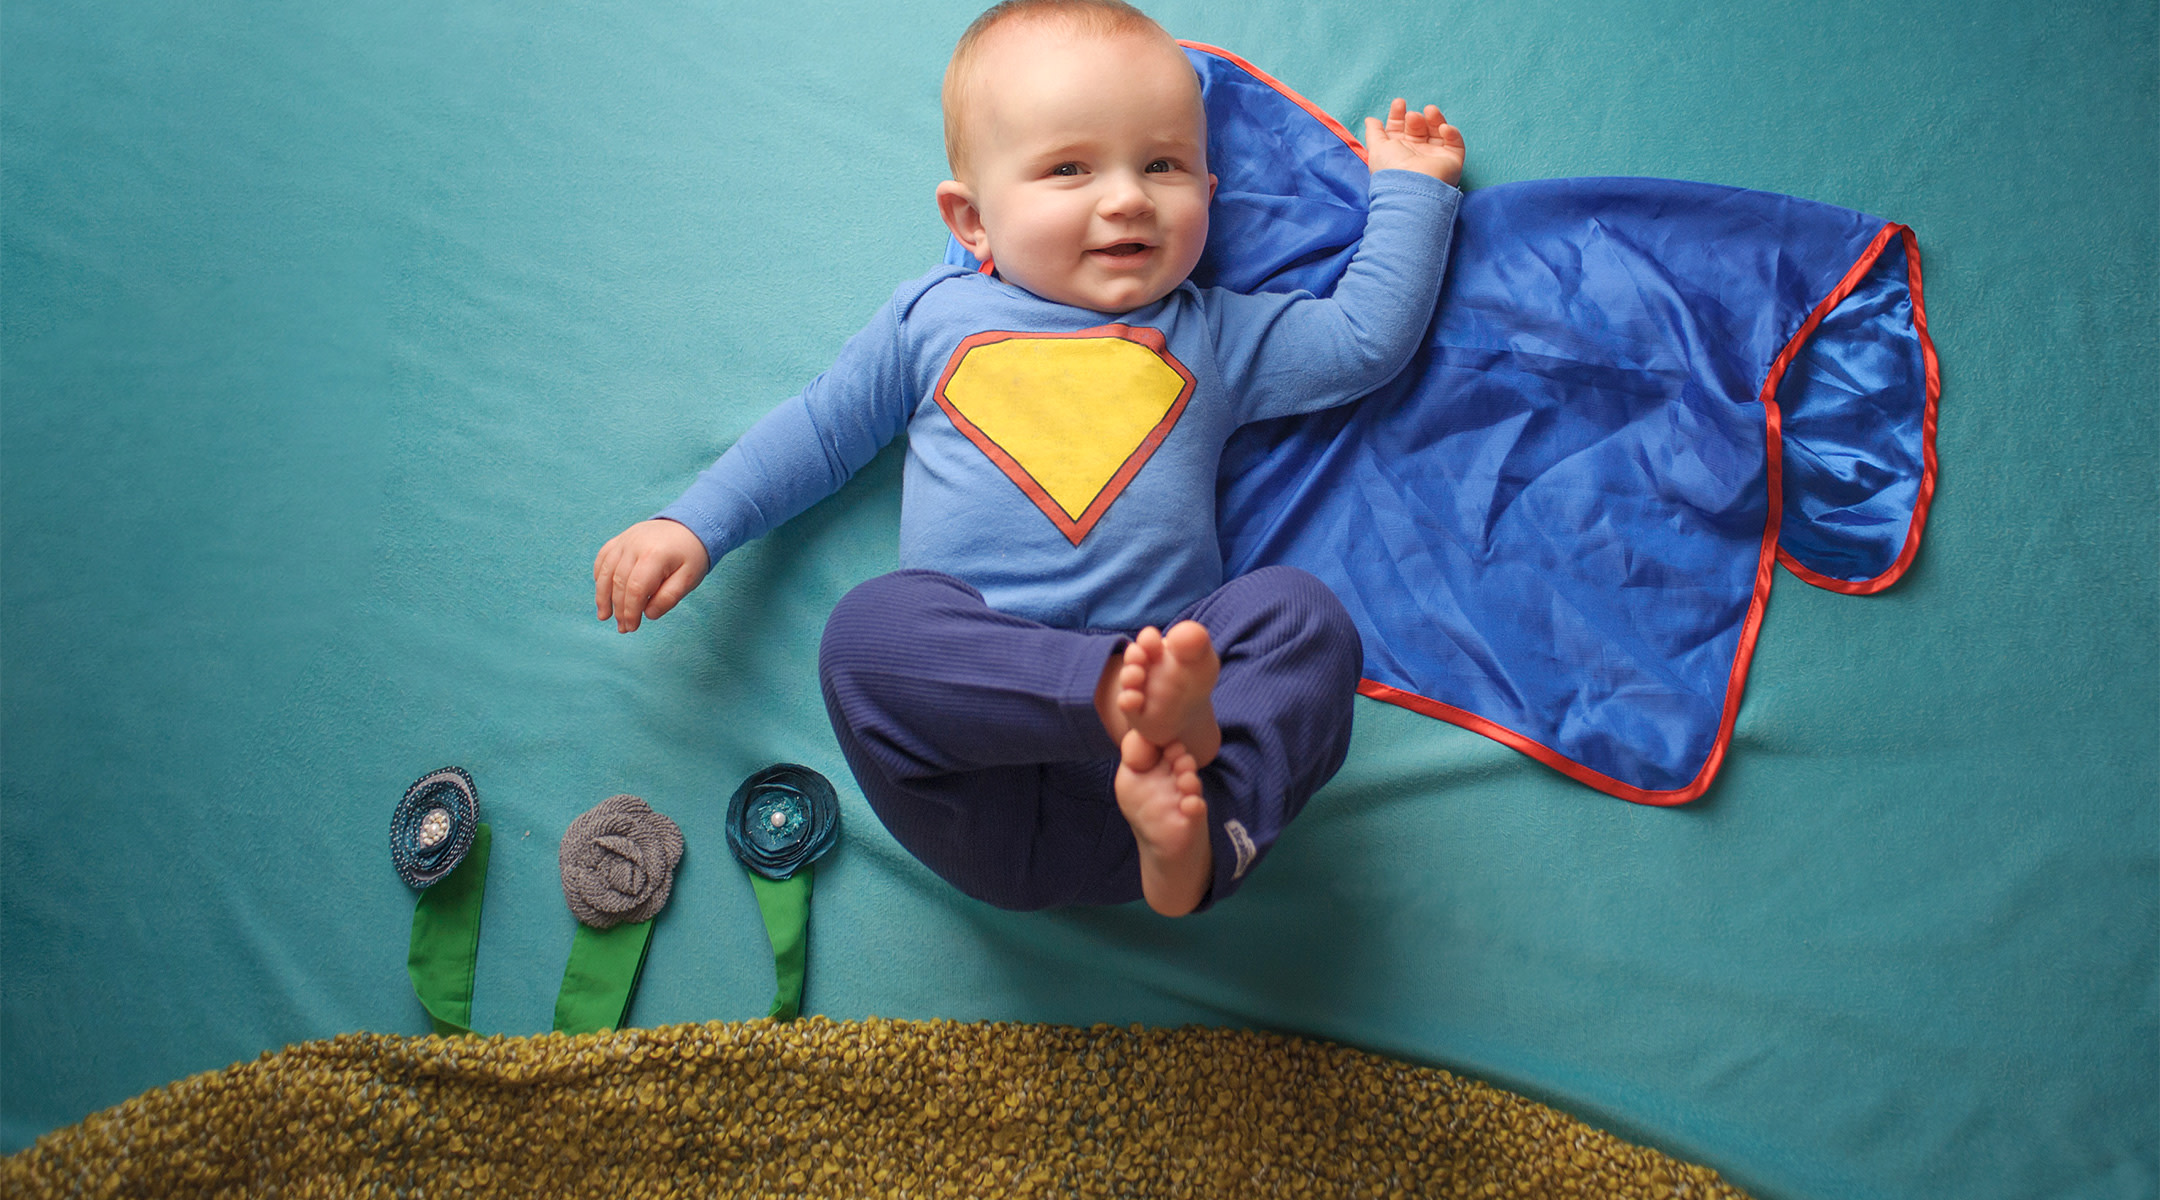 baby dressed up as super hero with blue cape